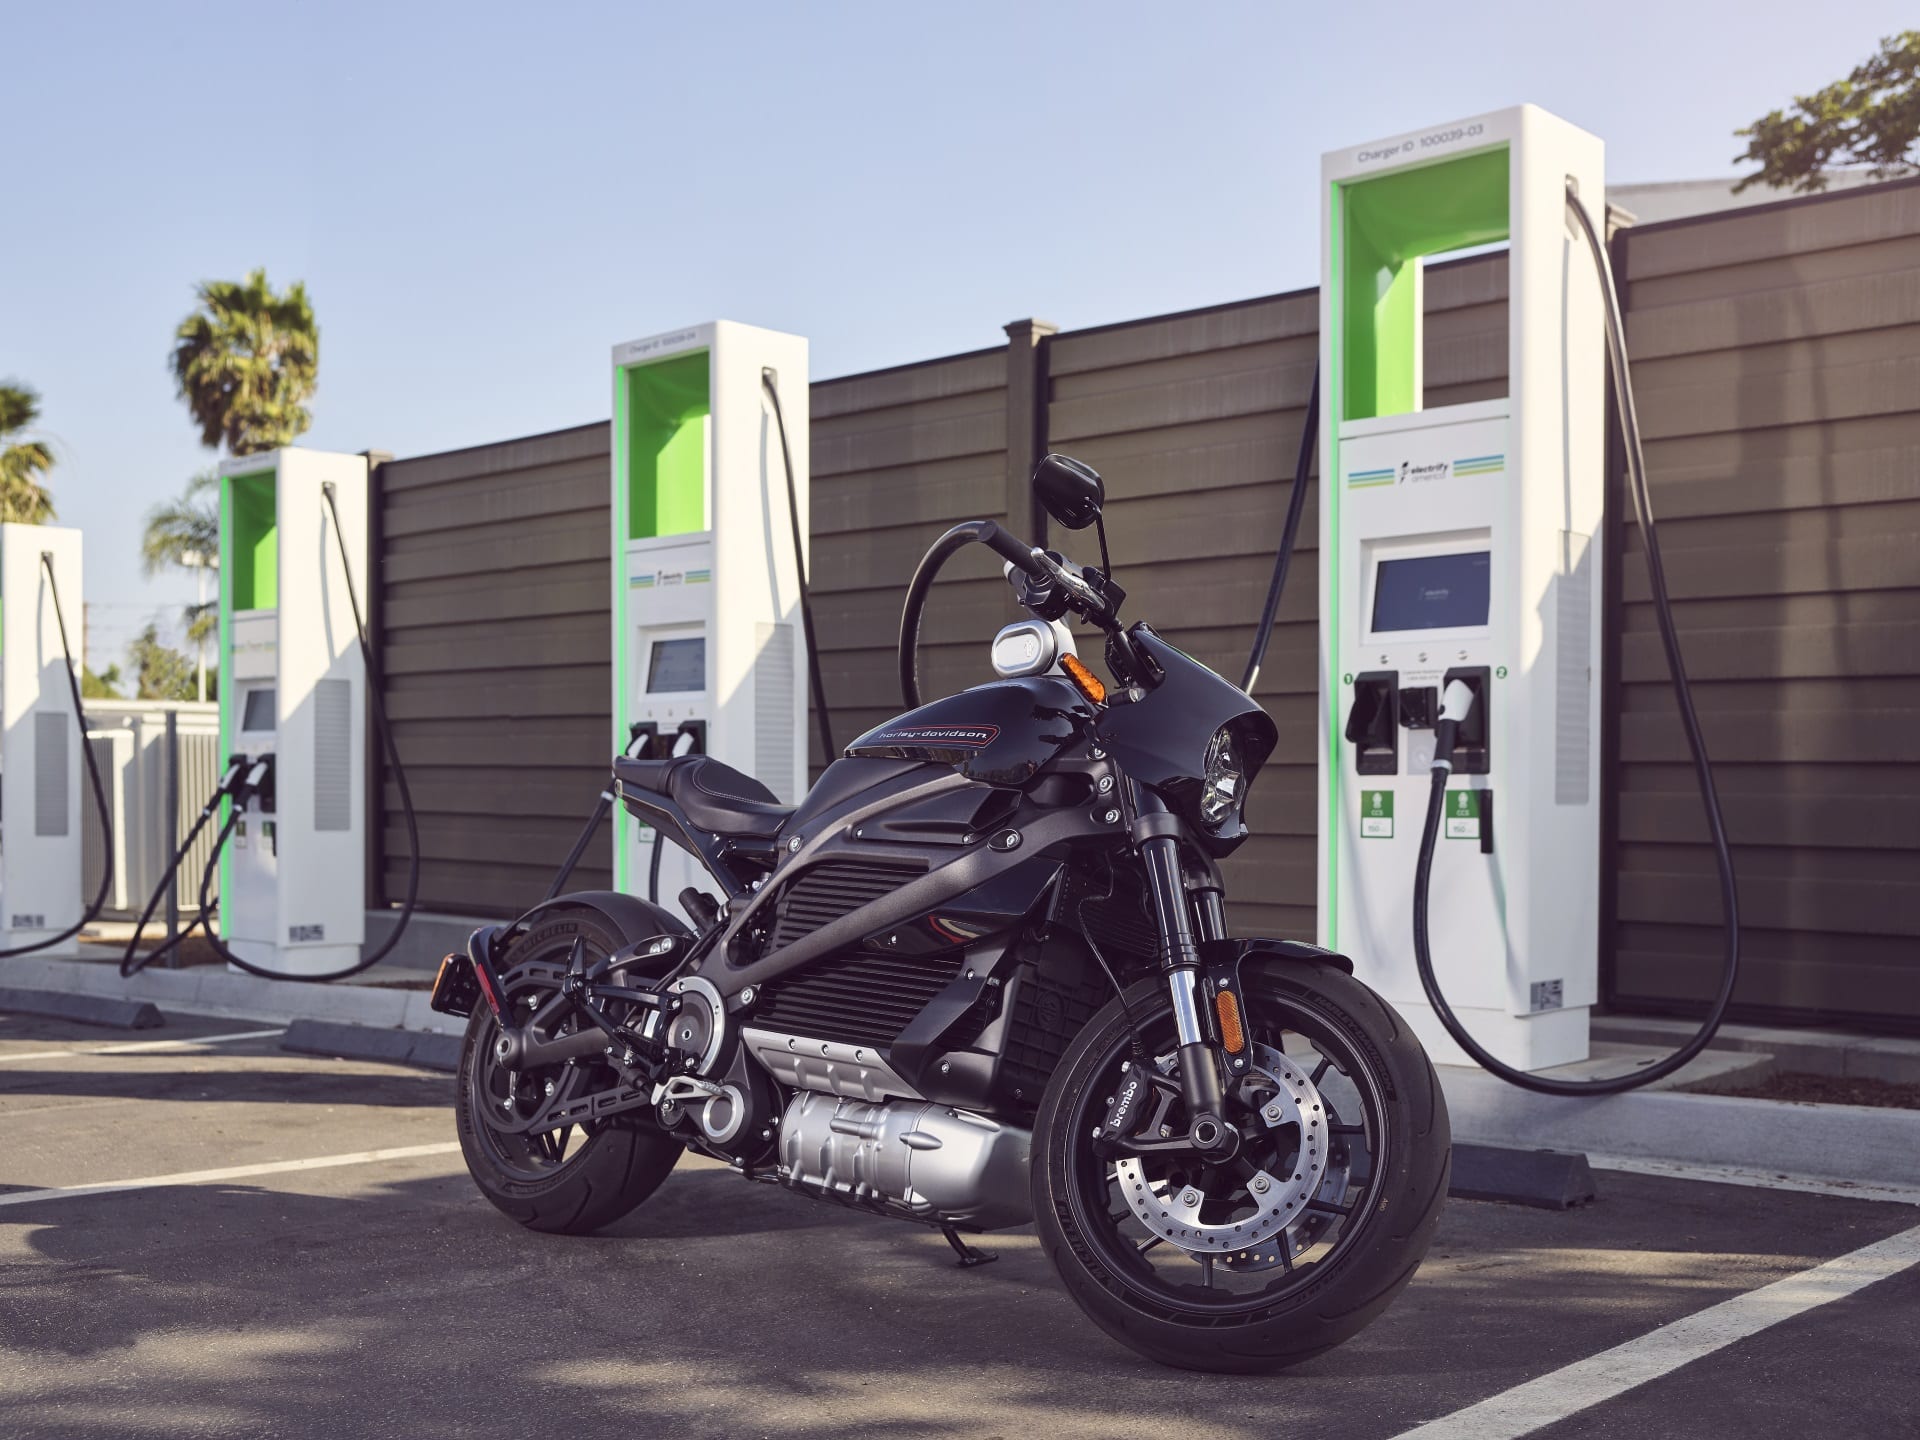 Harley Davidson LiveWire Electric Motorcycle Free Charging